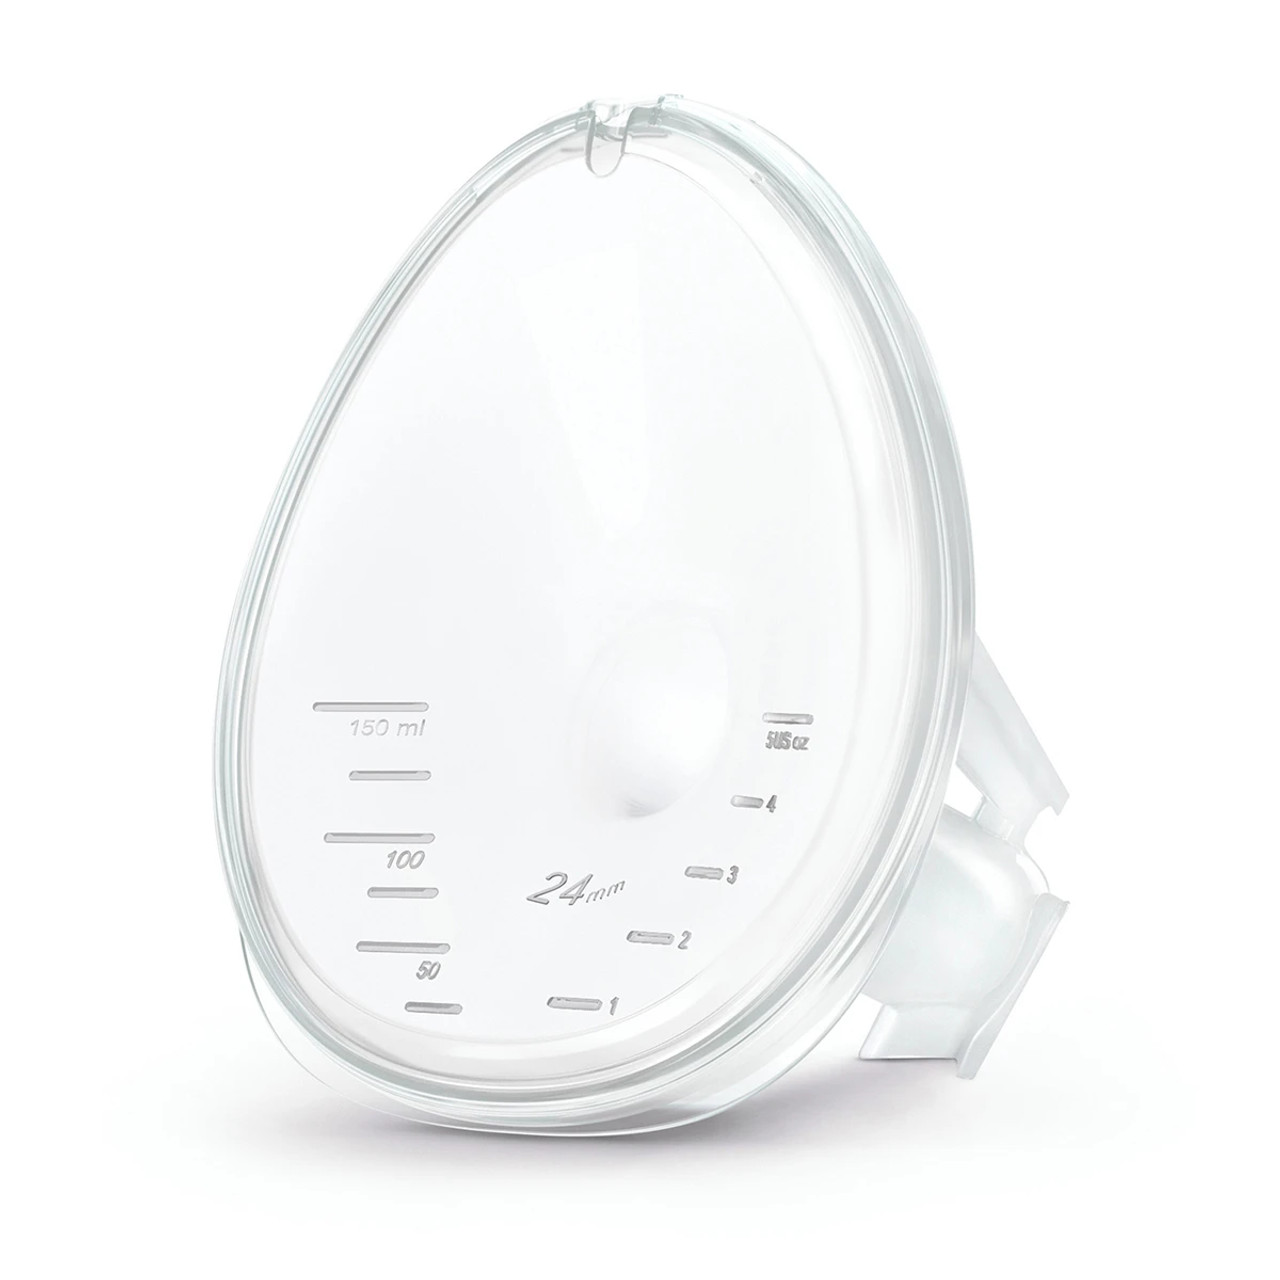 Medela Freestyle Hands-Free Breast pump (UPGRADE ONLY) 